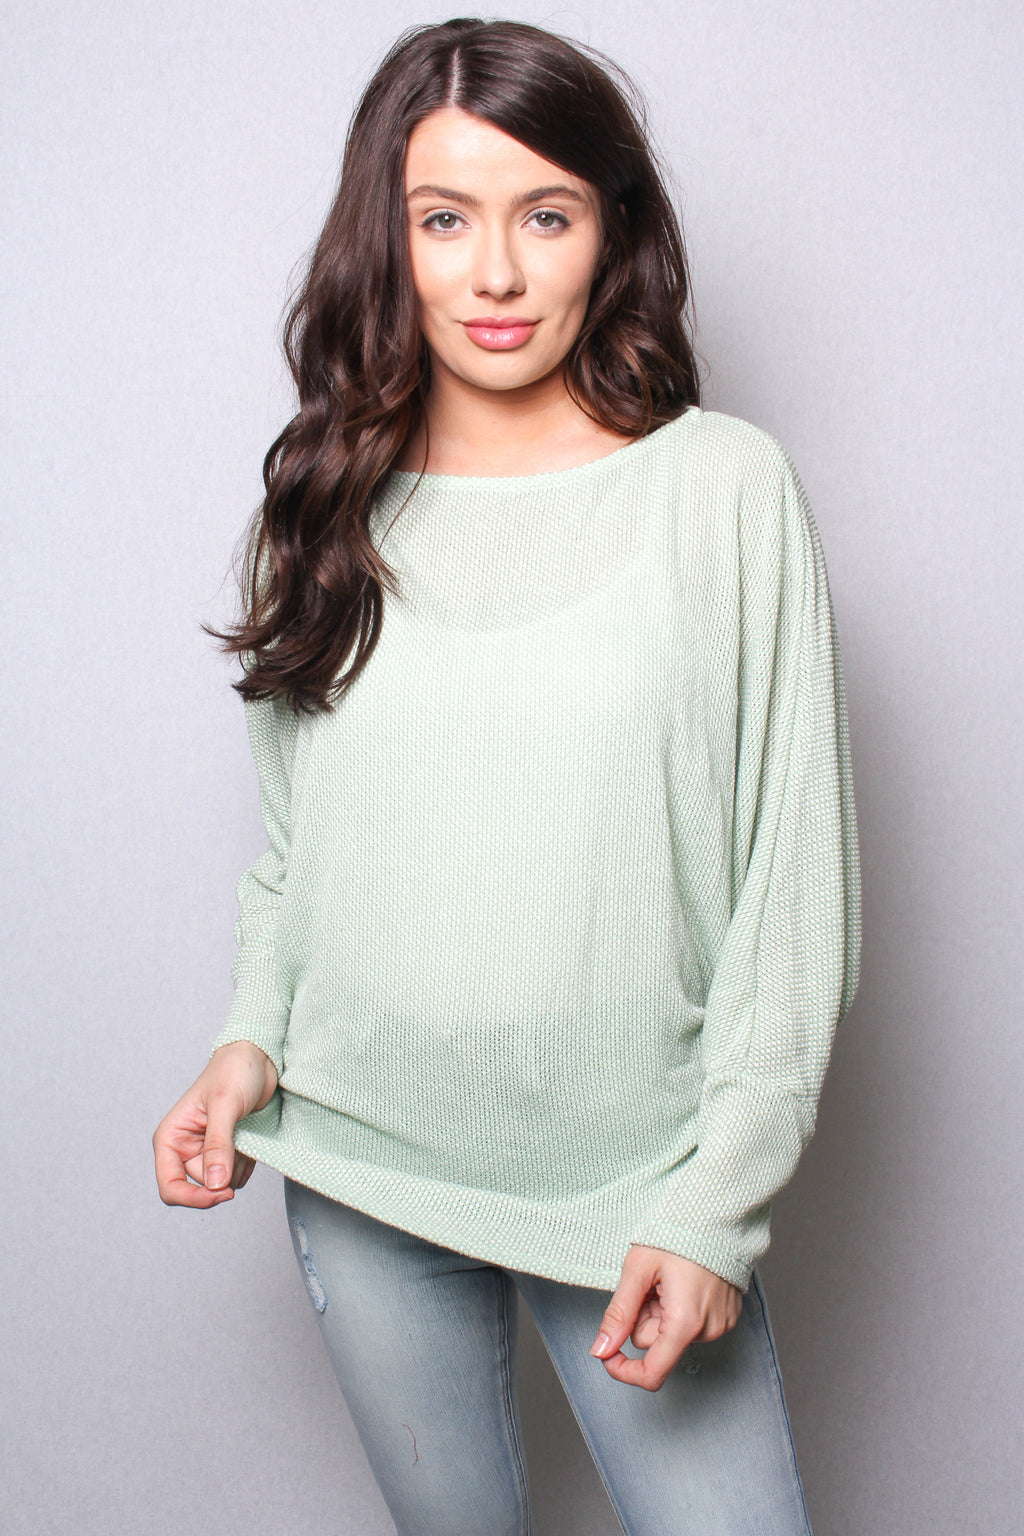 Women's Round Neck Long Sleeves Unlined Knit Top